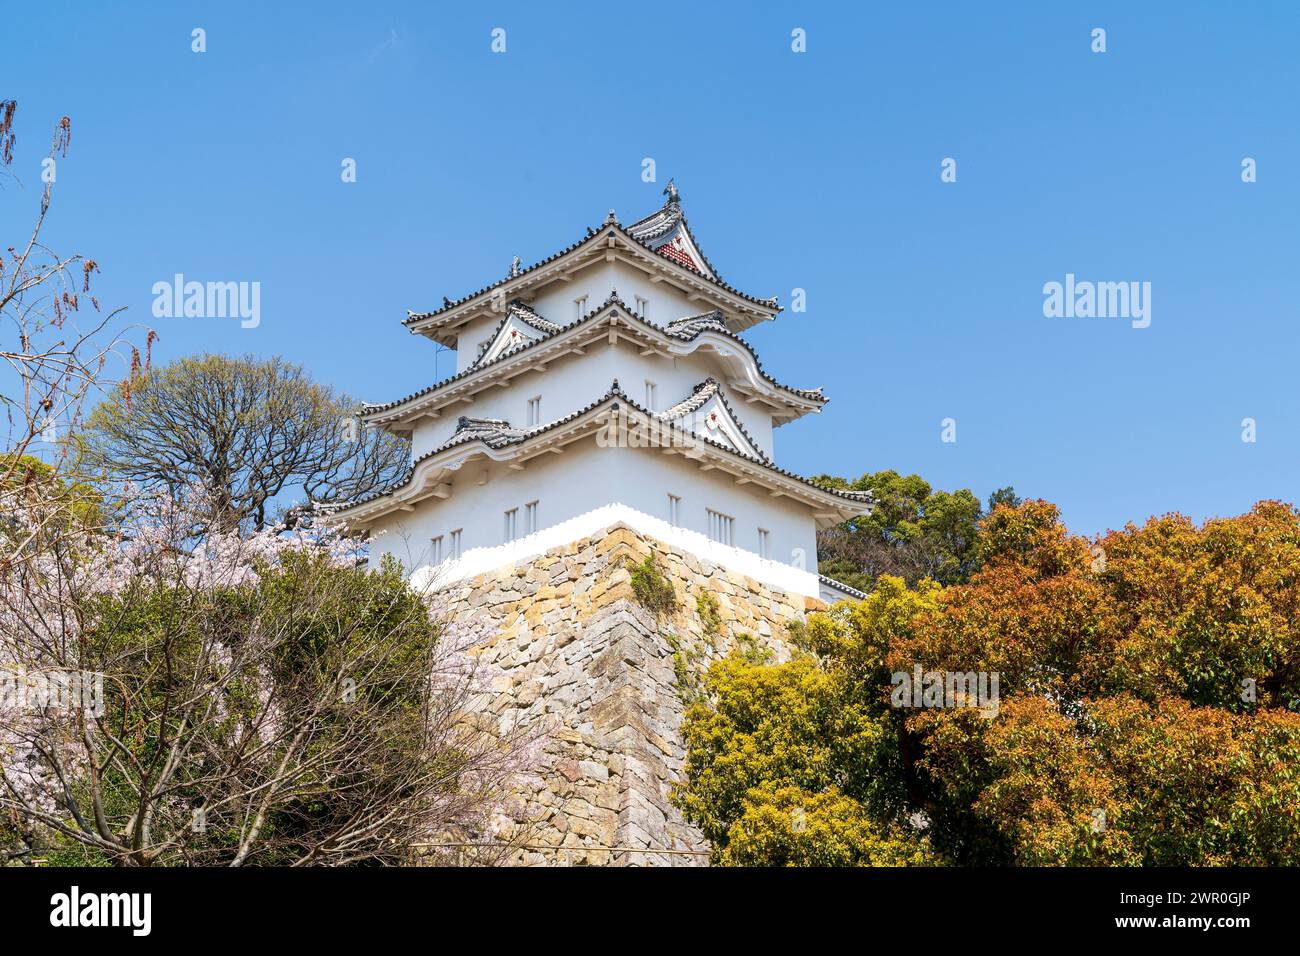 Low angle view of the Ishigaki stone walls and the white Hitsujisaru turret, yagura, at Akashi castle in Japan in the springtime. Clear blue sky. Stock Photo